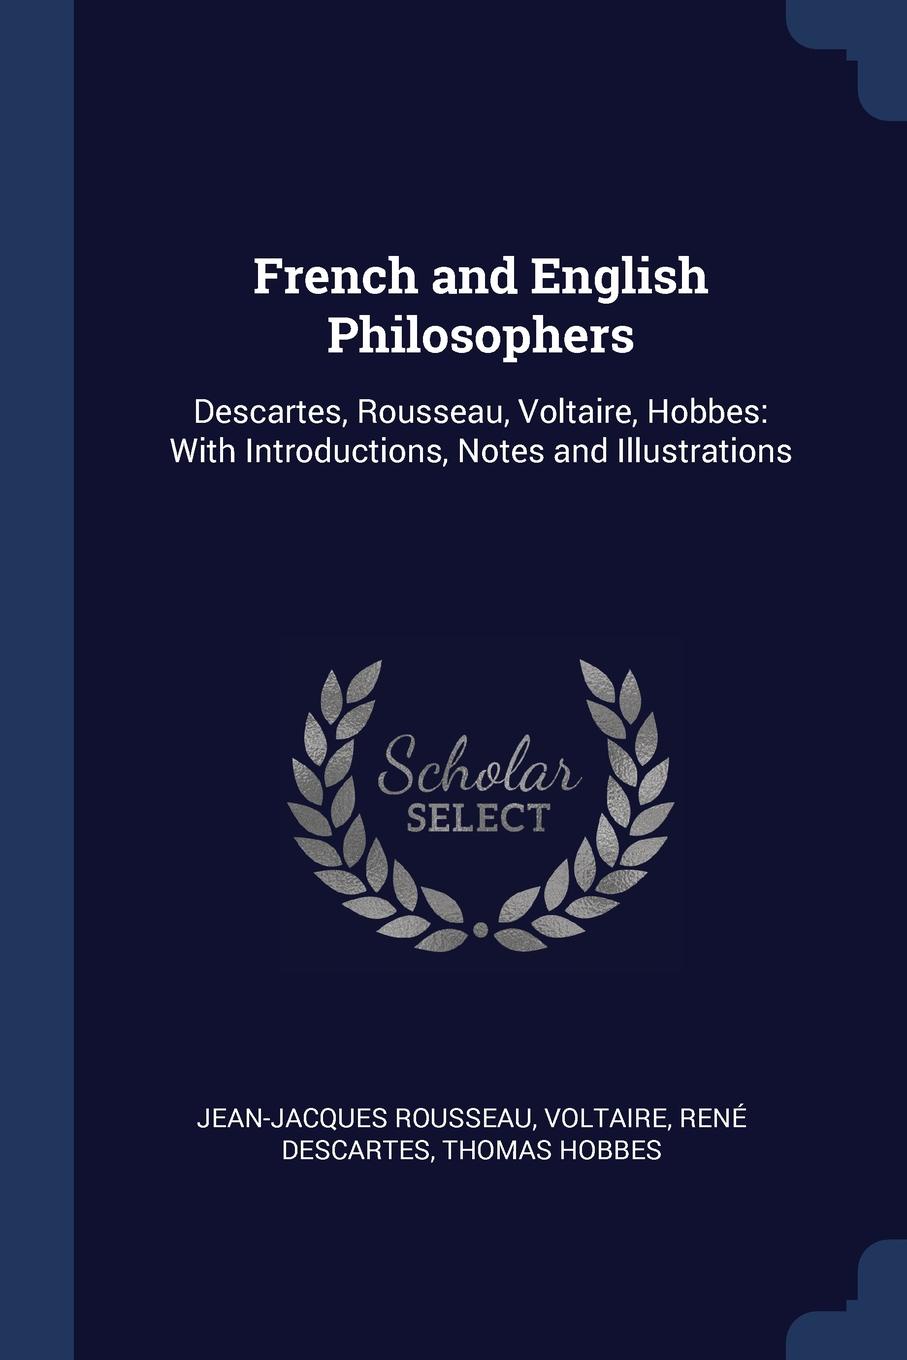 French and English Philosophers. Descartes, Rousseau, Voltaire, Hobbes: With Introductions, Notes and Illustrations